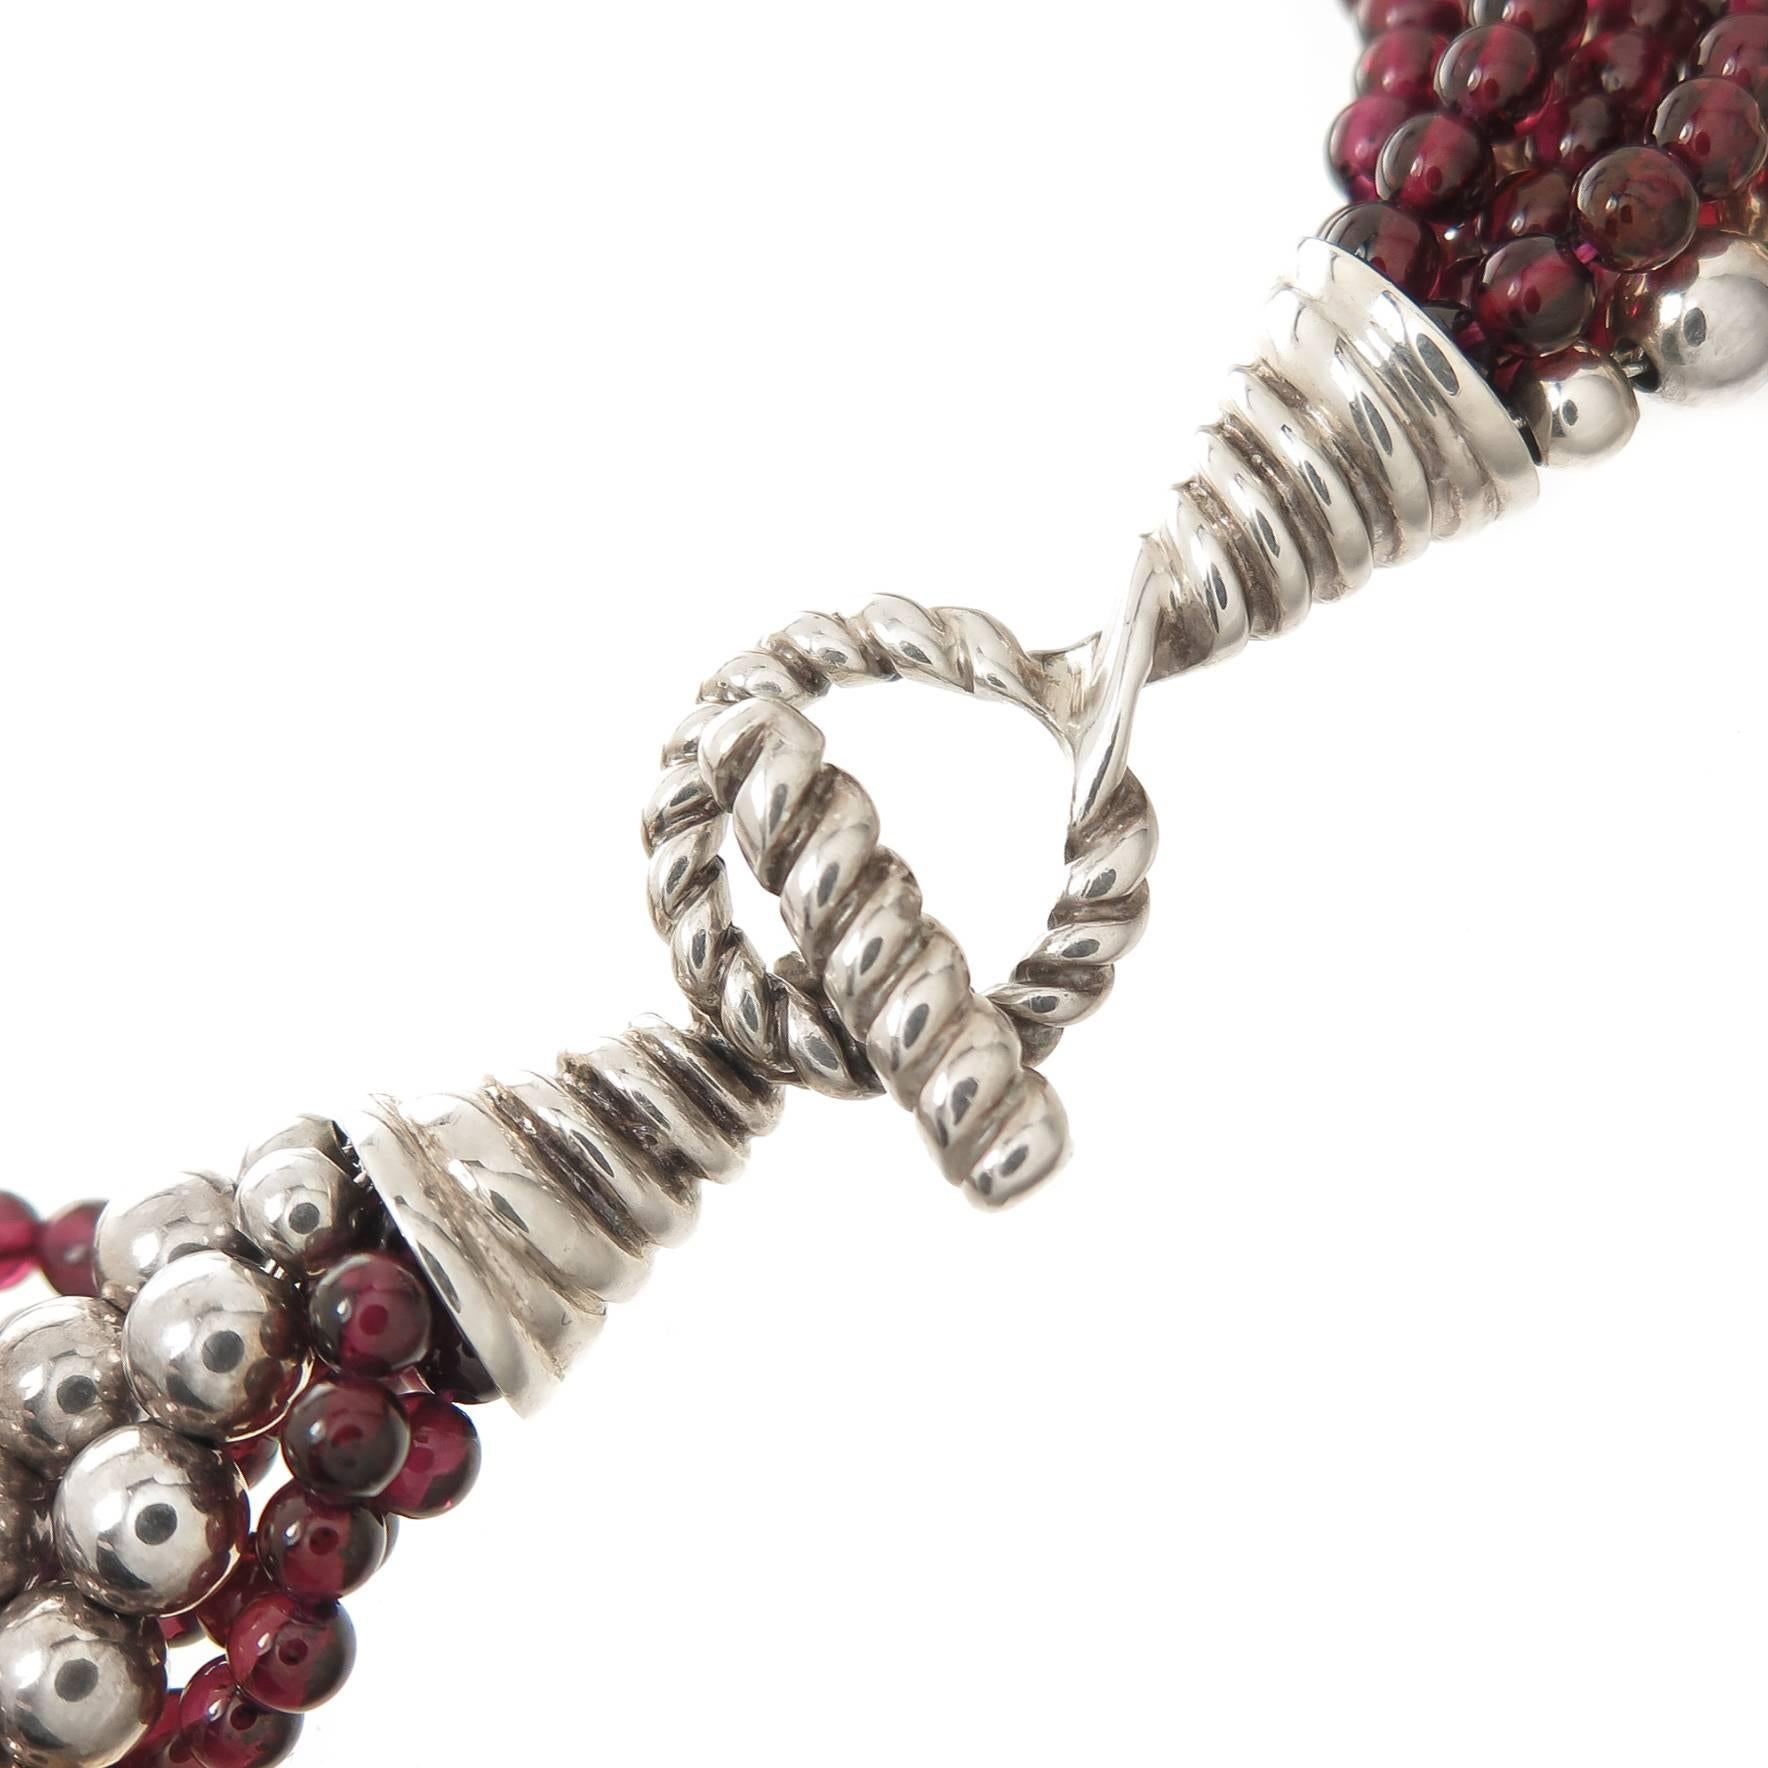 Circa 1990s Tiffany & Company Torsade Necklace, comprised of 5 strands of 4 M.M. Round Garnet and 2 Strands of 6 M.M. Sterling Silver Beads, measuring 16 1/2 Inches in length and 1 inch wide. Having a toggle clasp. Comes in original Tiffany Box.